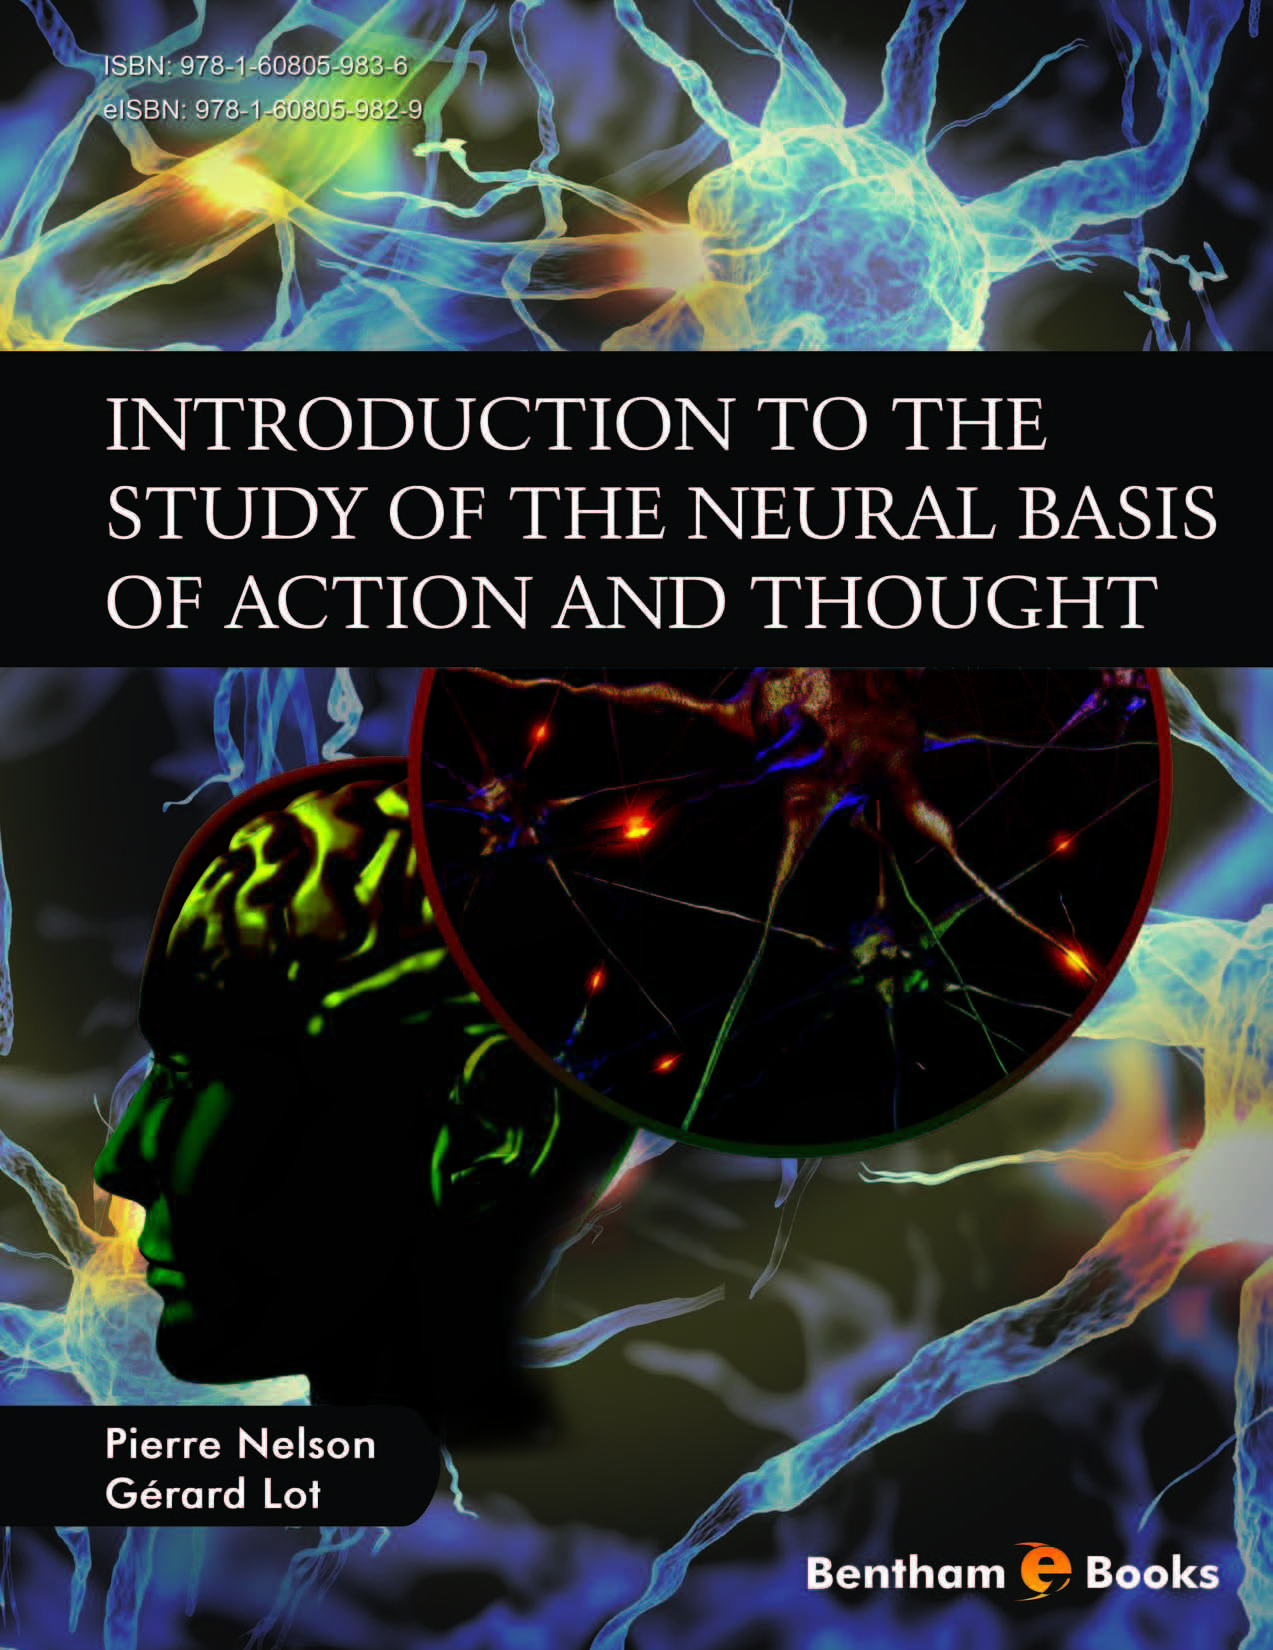 Introduction to the Study of the Neural Basis of Action and Thought